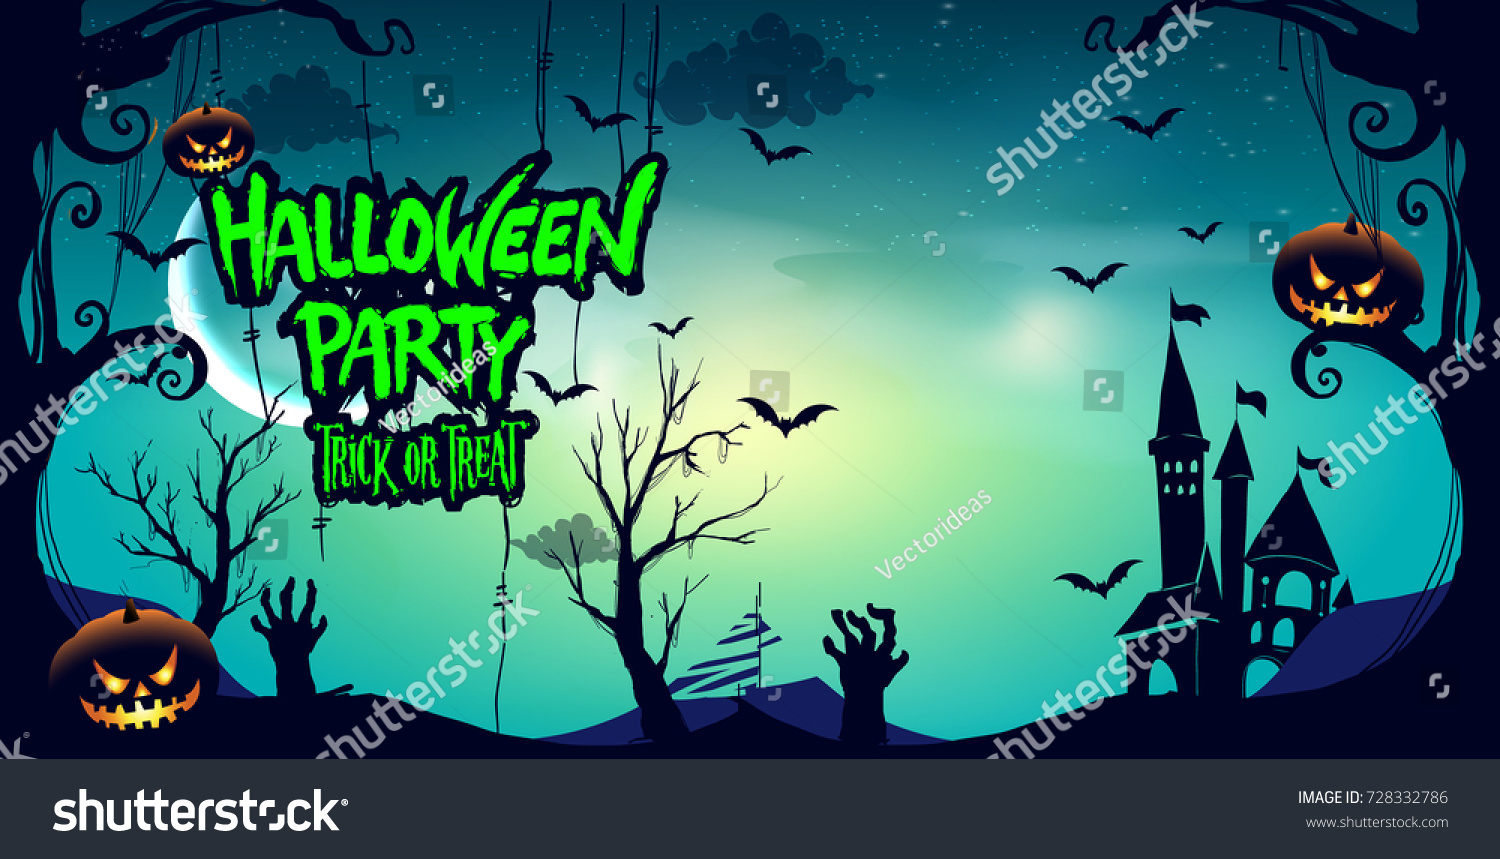 Halloween Party Poster Design Night Background Stock Vector (Royalty ...